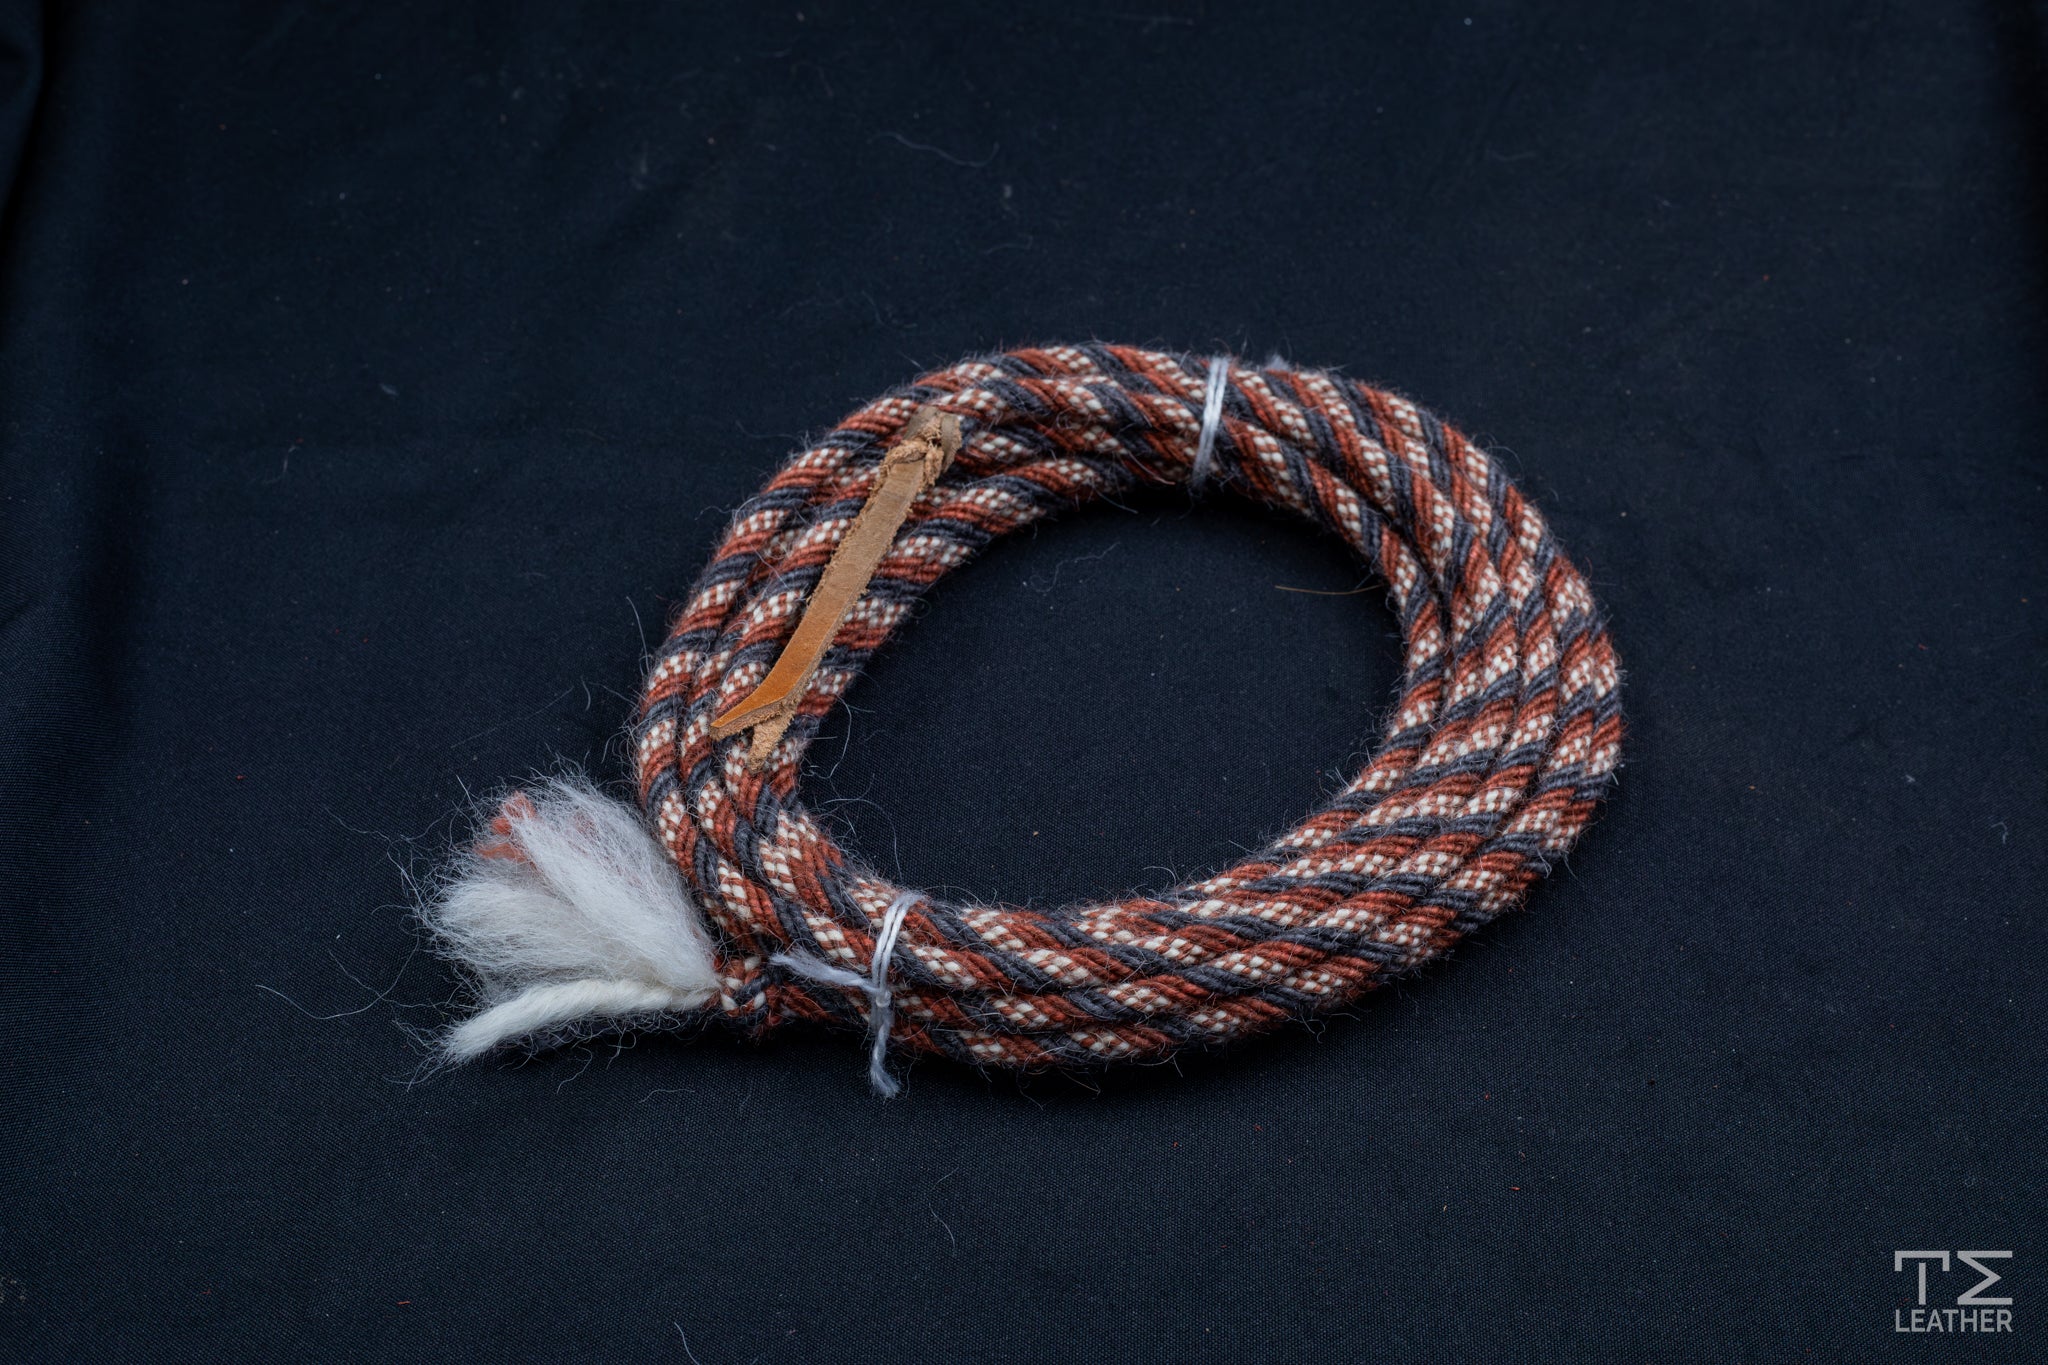 1/4" Copper, Grey & White Mohair Mecate